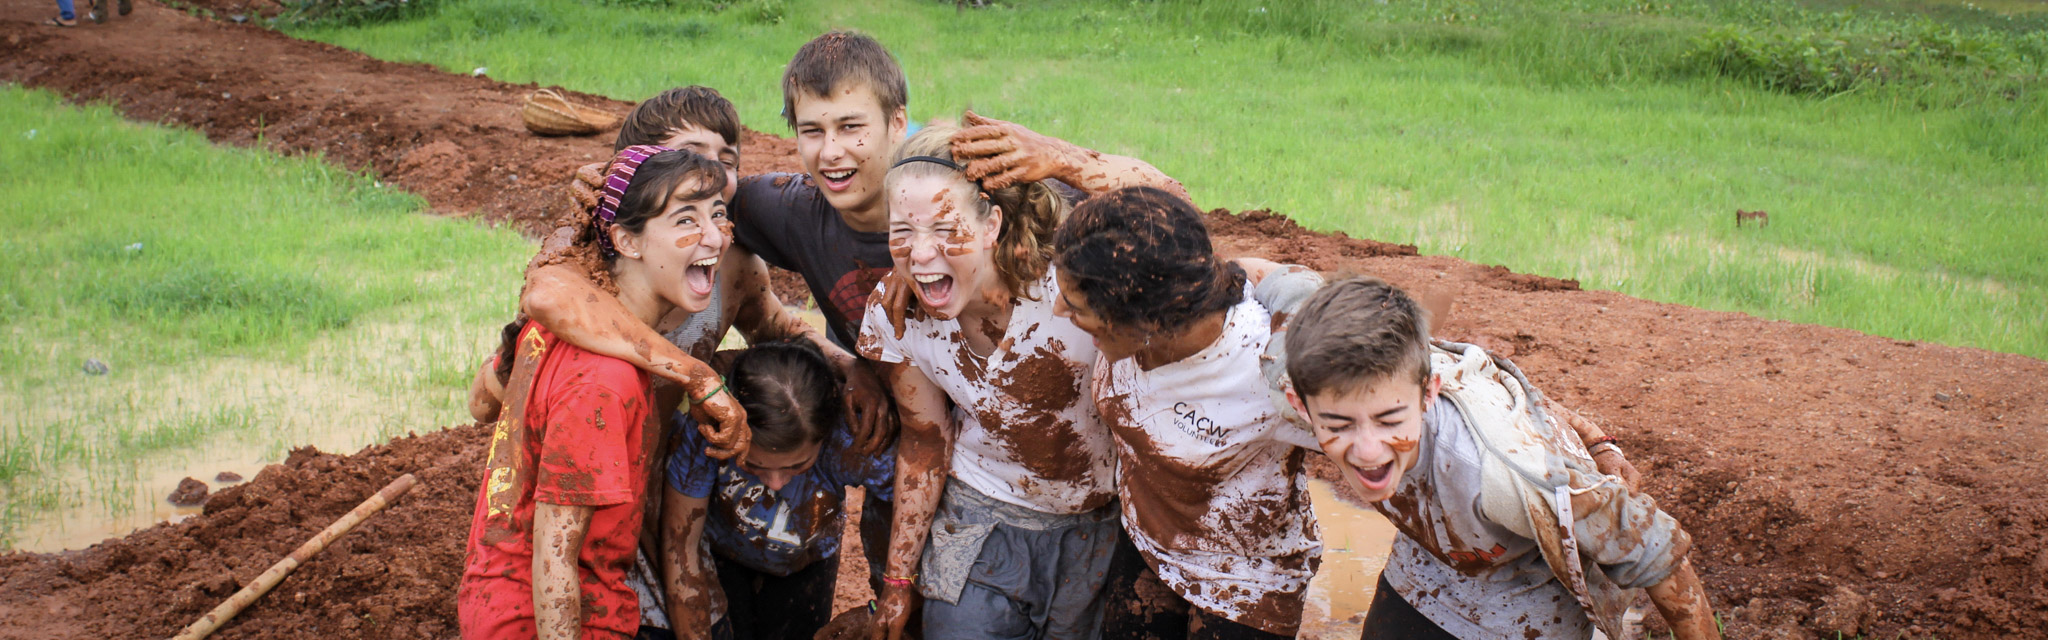 How is Service Learning Different from Summer Camp?